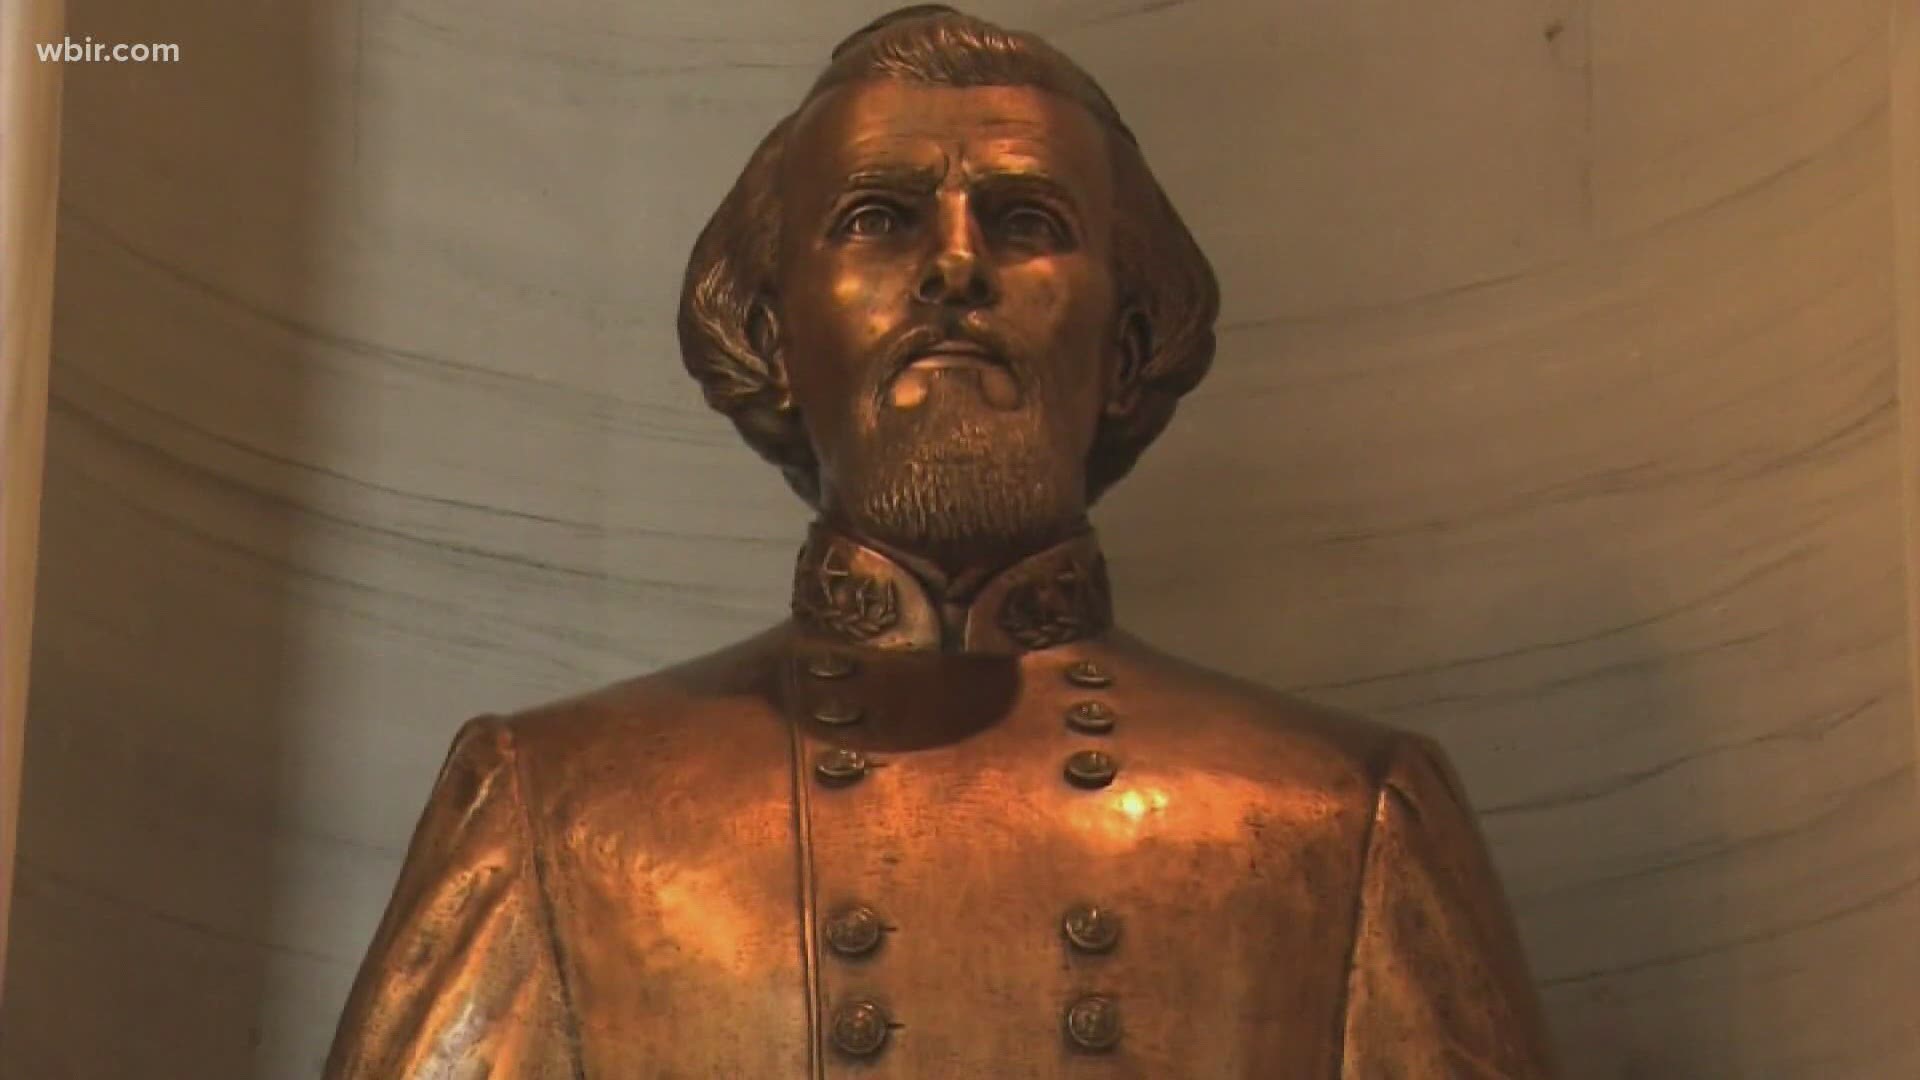 Early KKK leader and Confederate general Nathan Bedford Forrest's bust is one step closer from being removed from capitol grounds and into the state museum.